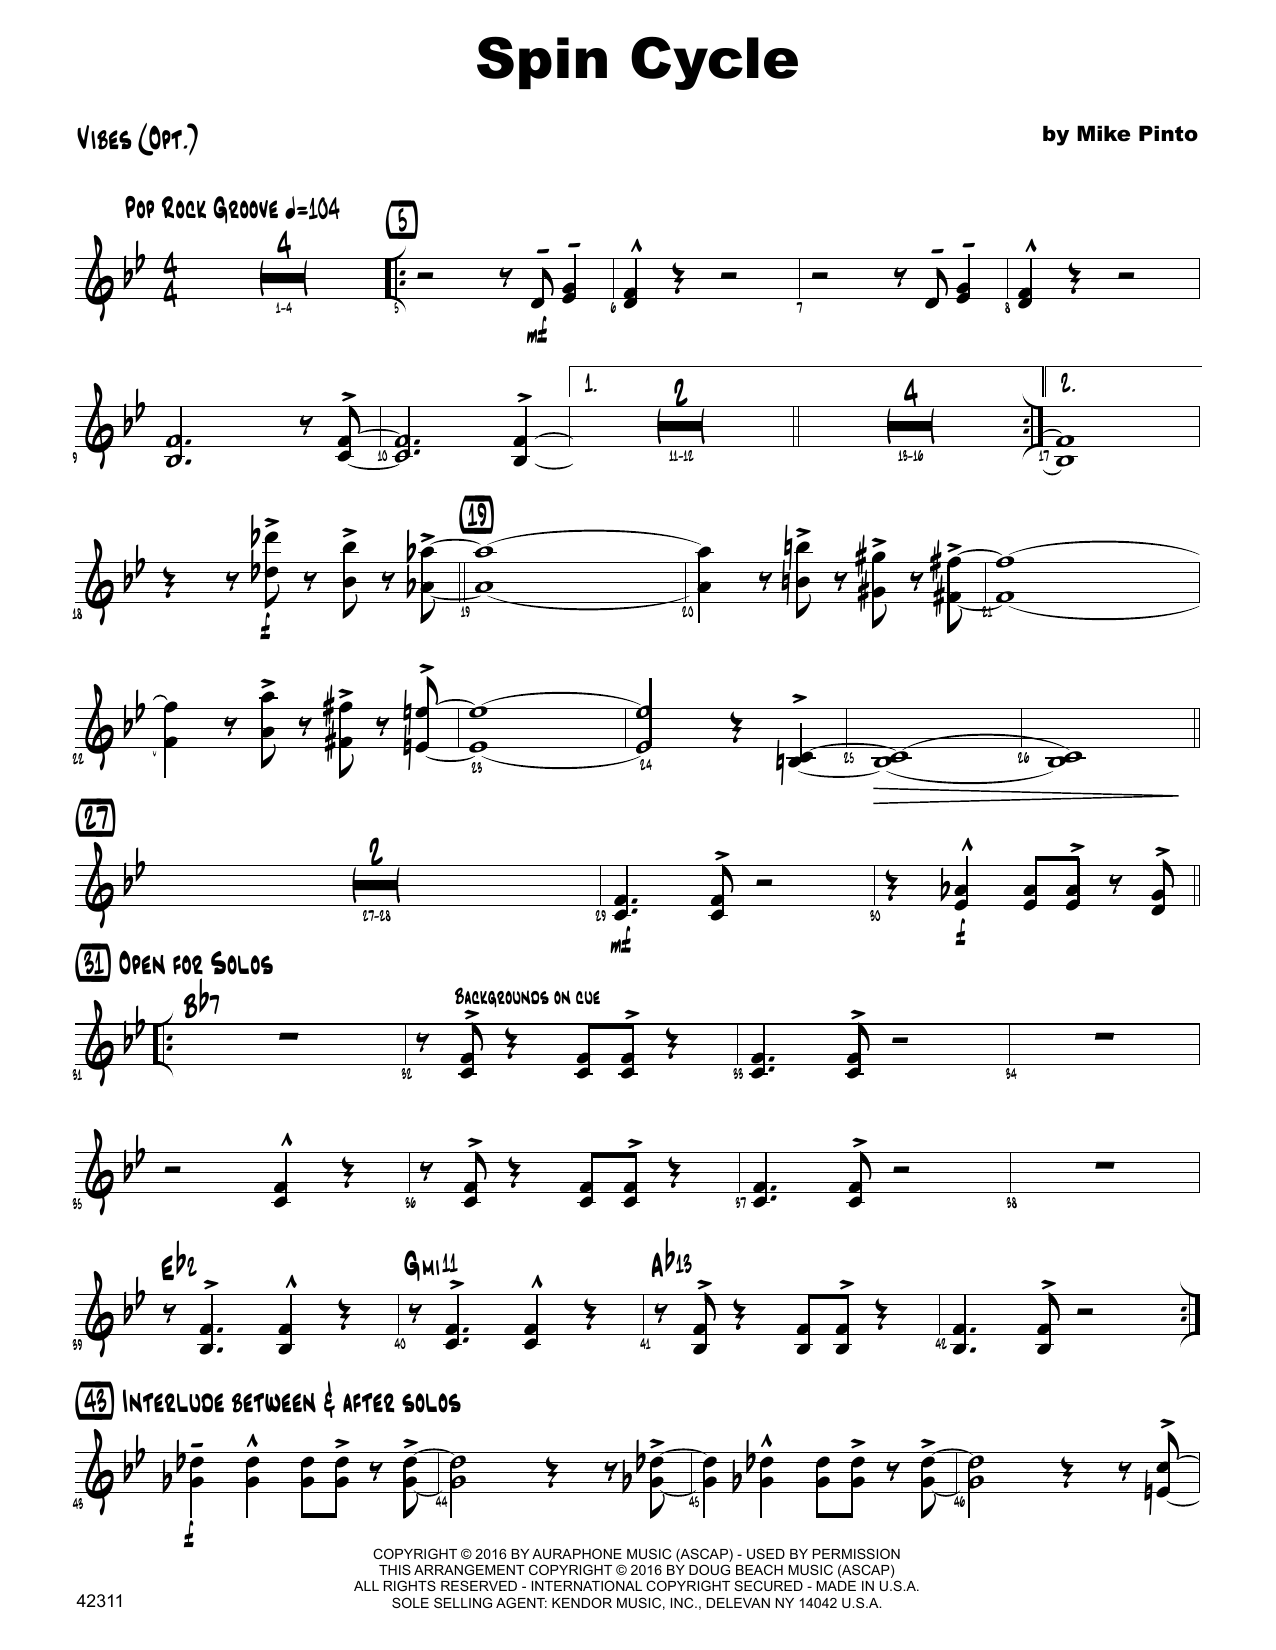 Download Mike Pinto Spin Cycle - Vibes Sheet Music